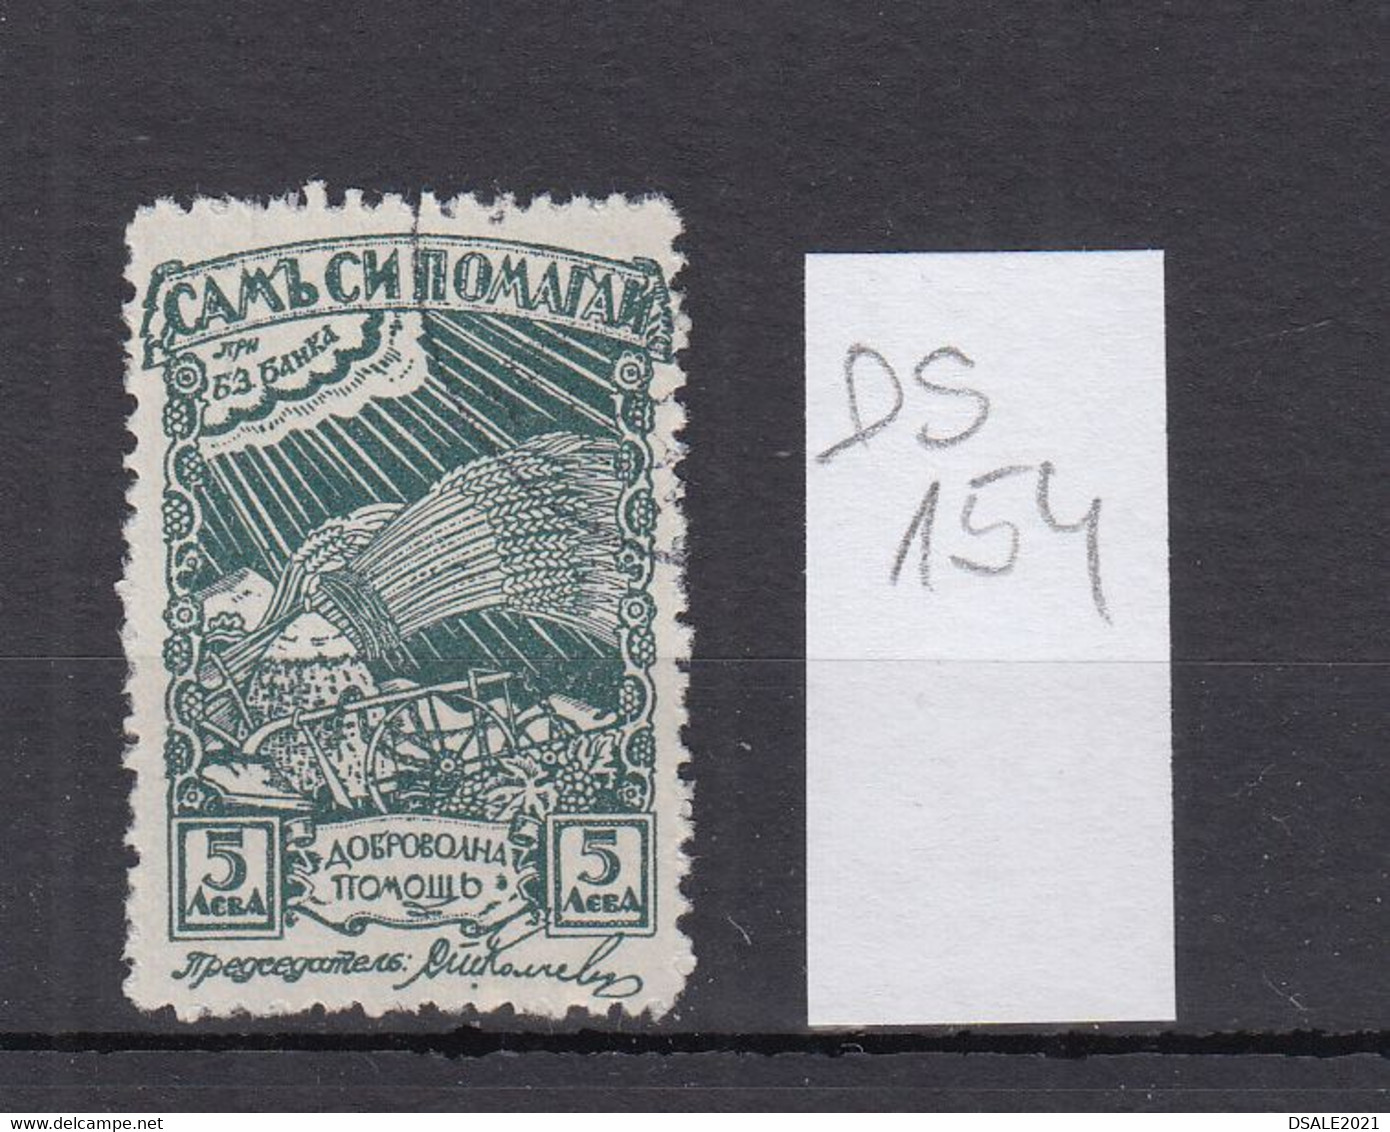 Bulgaria Bulgarie Bulgarije 1930s Agricultural Bank 5Lv. Fund Self Help Fiscal Revenue Stamp Bulgarian (ds154) - Timbres De Service